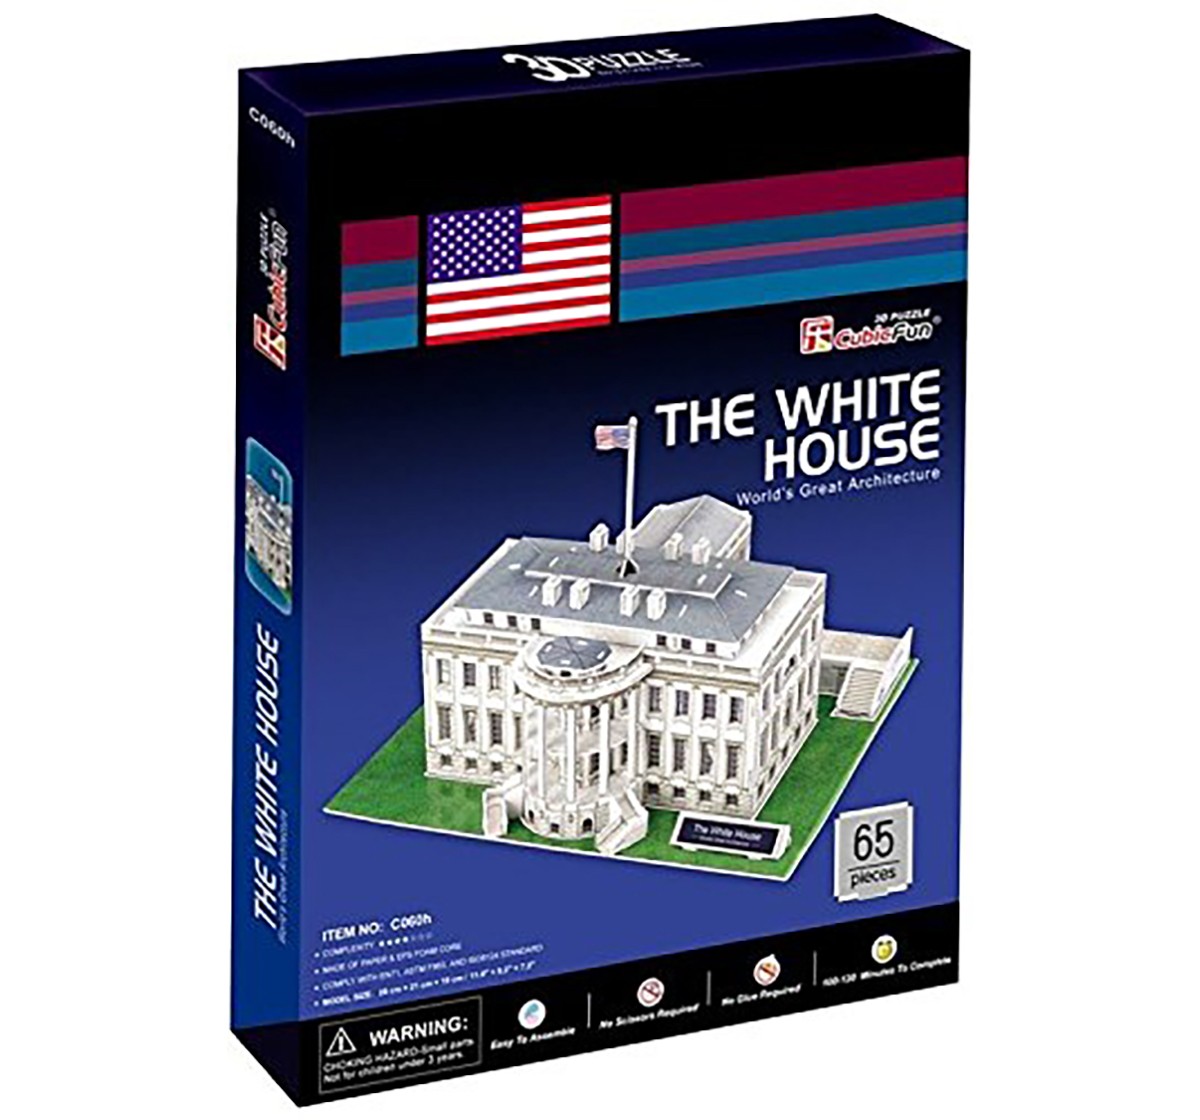 Cubicfun Frank 3D Puzzle The White House Puzzles for Kids age 6Y+ (White)